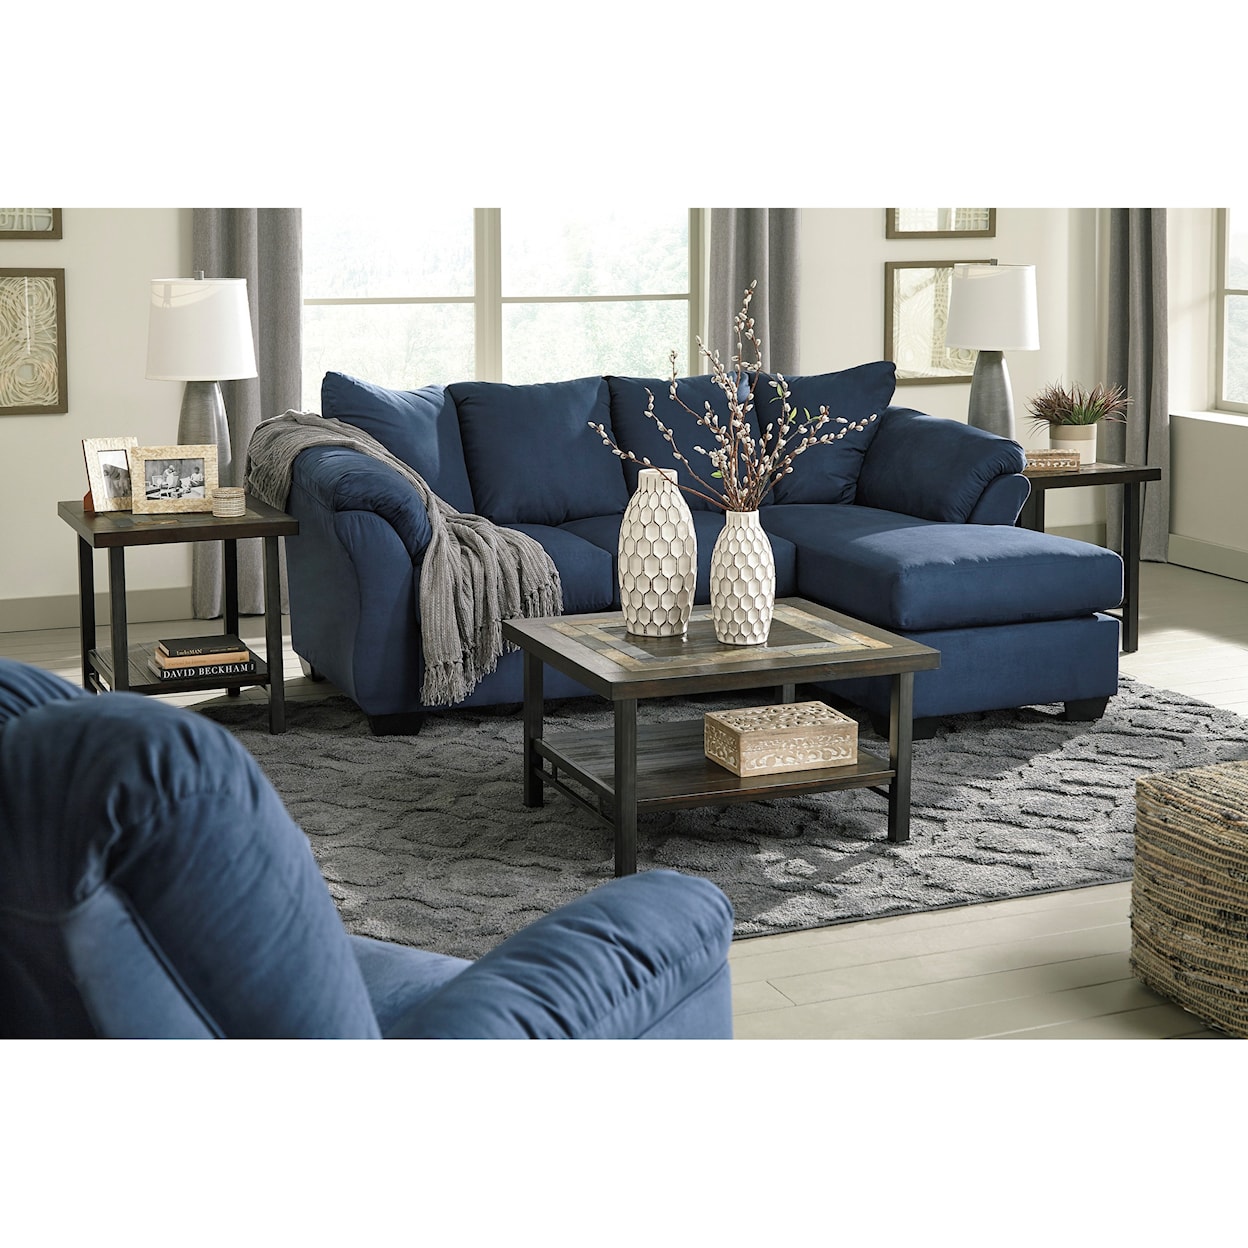 Signature Design by Ashley Furniture Darcy Sofa Chaise